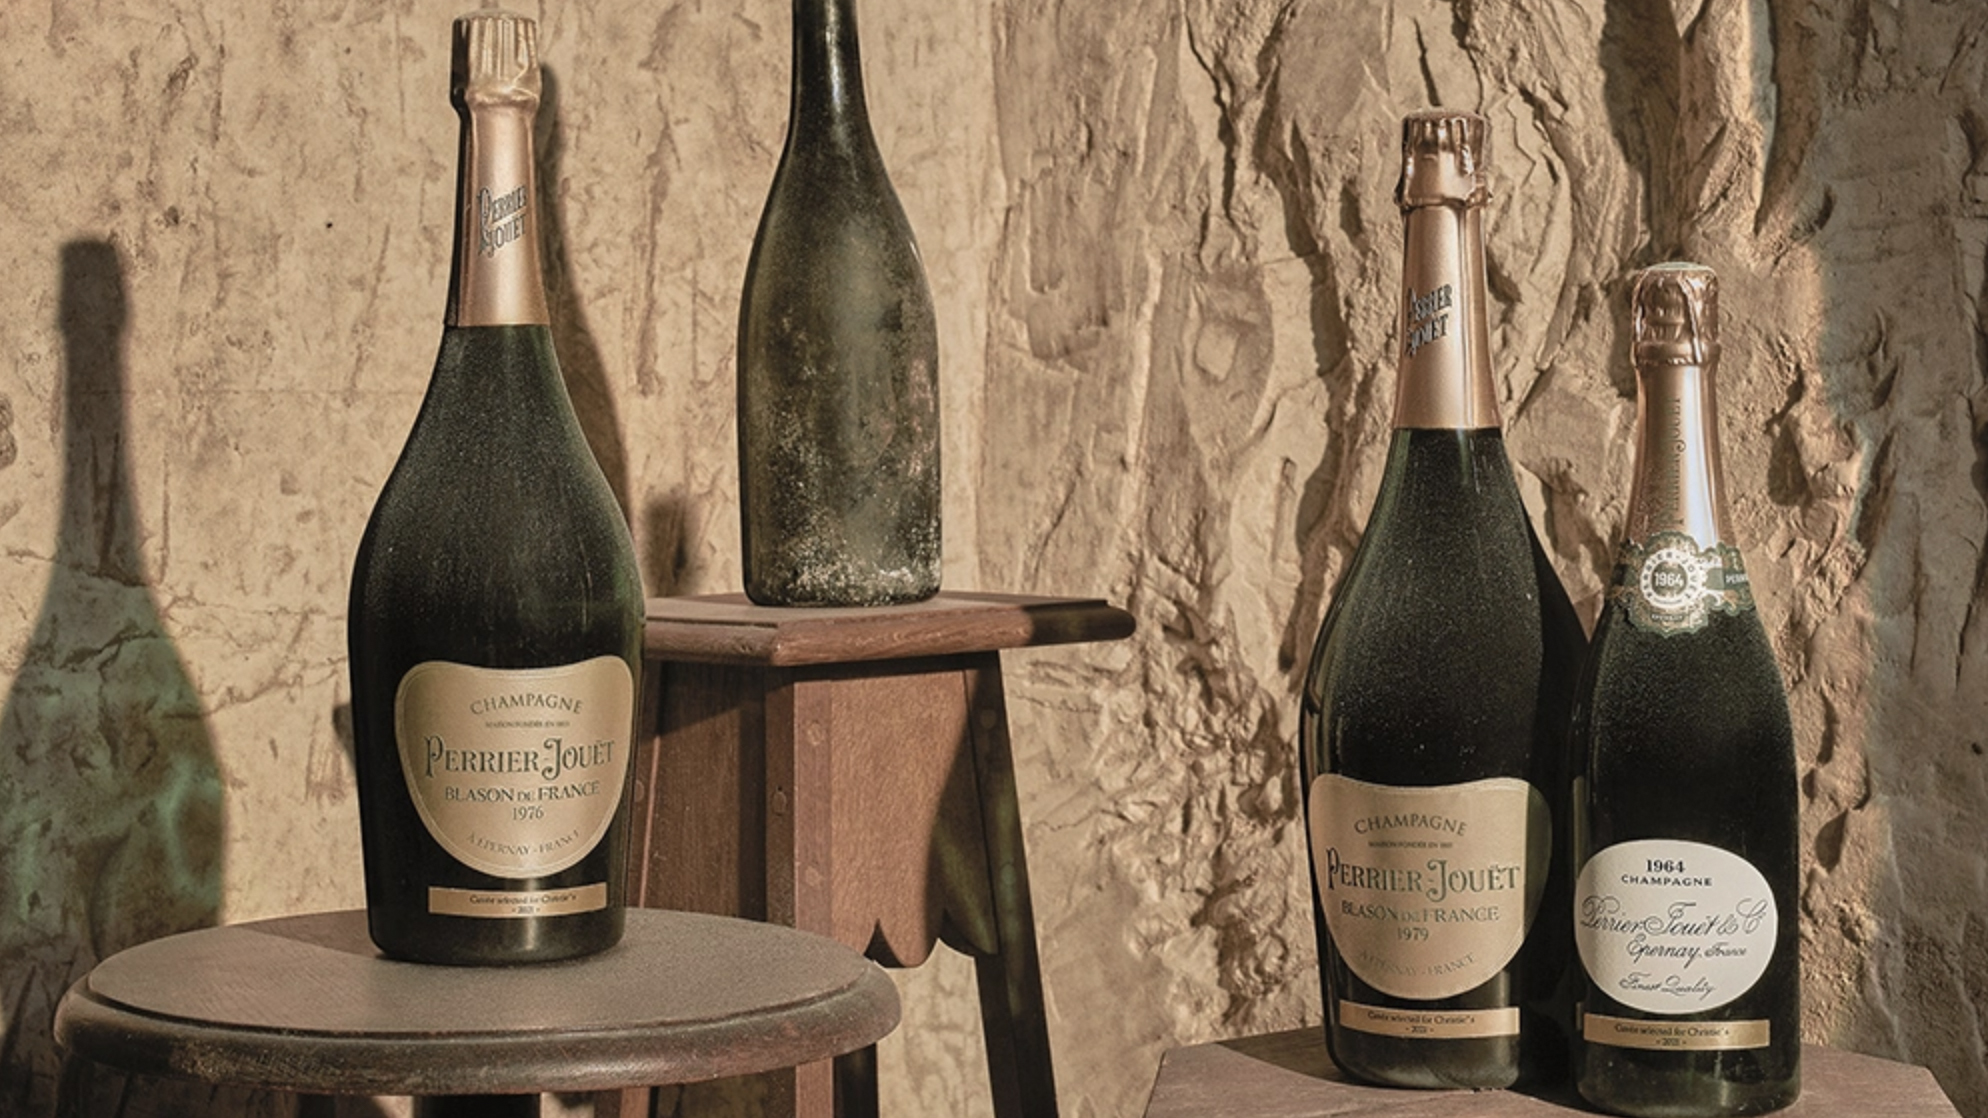 1874 Perrier-Jouët Brut Millésimé Champagne and others